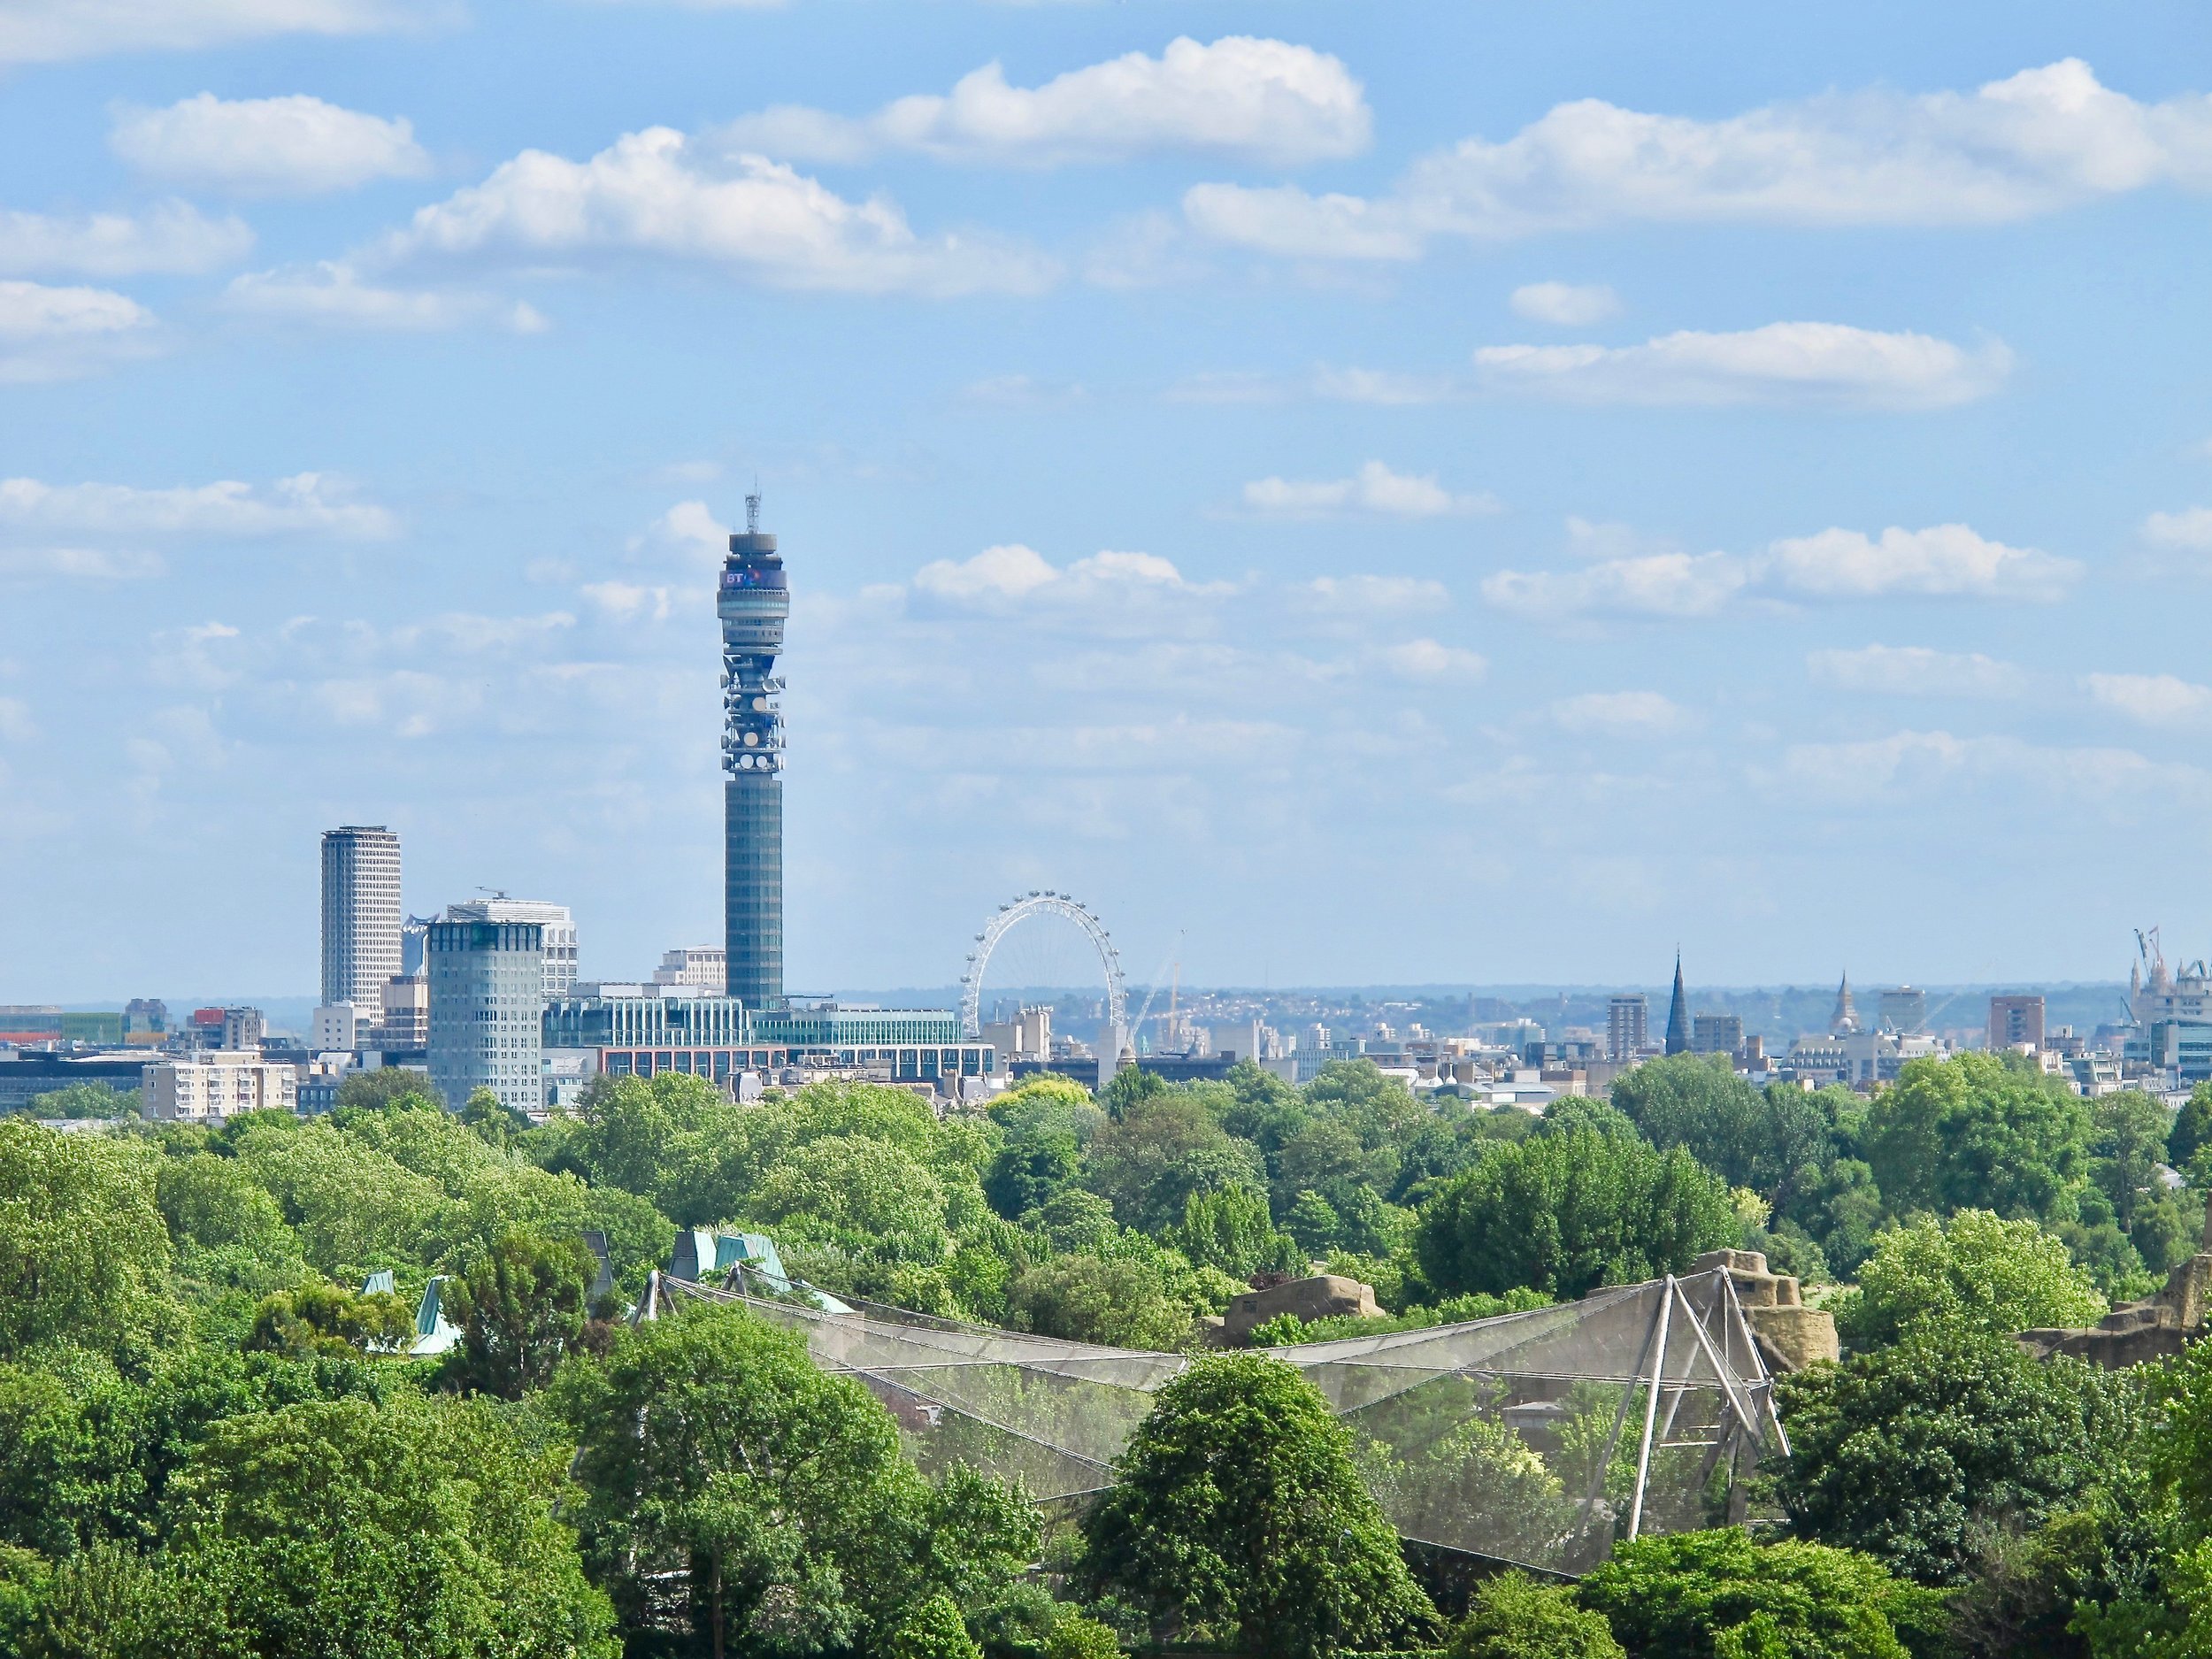 London BT Tower viewed from Primrose Hill